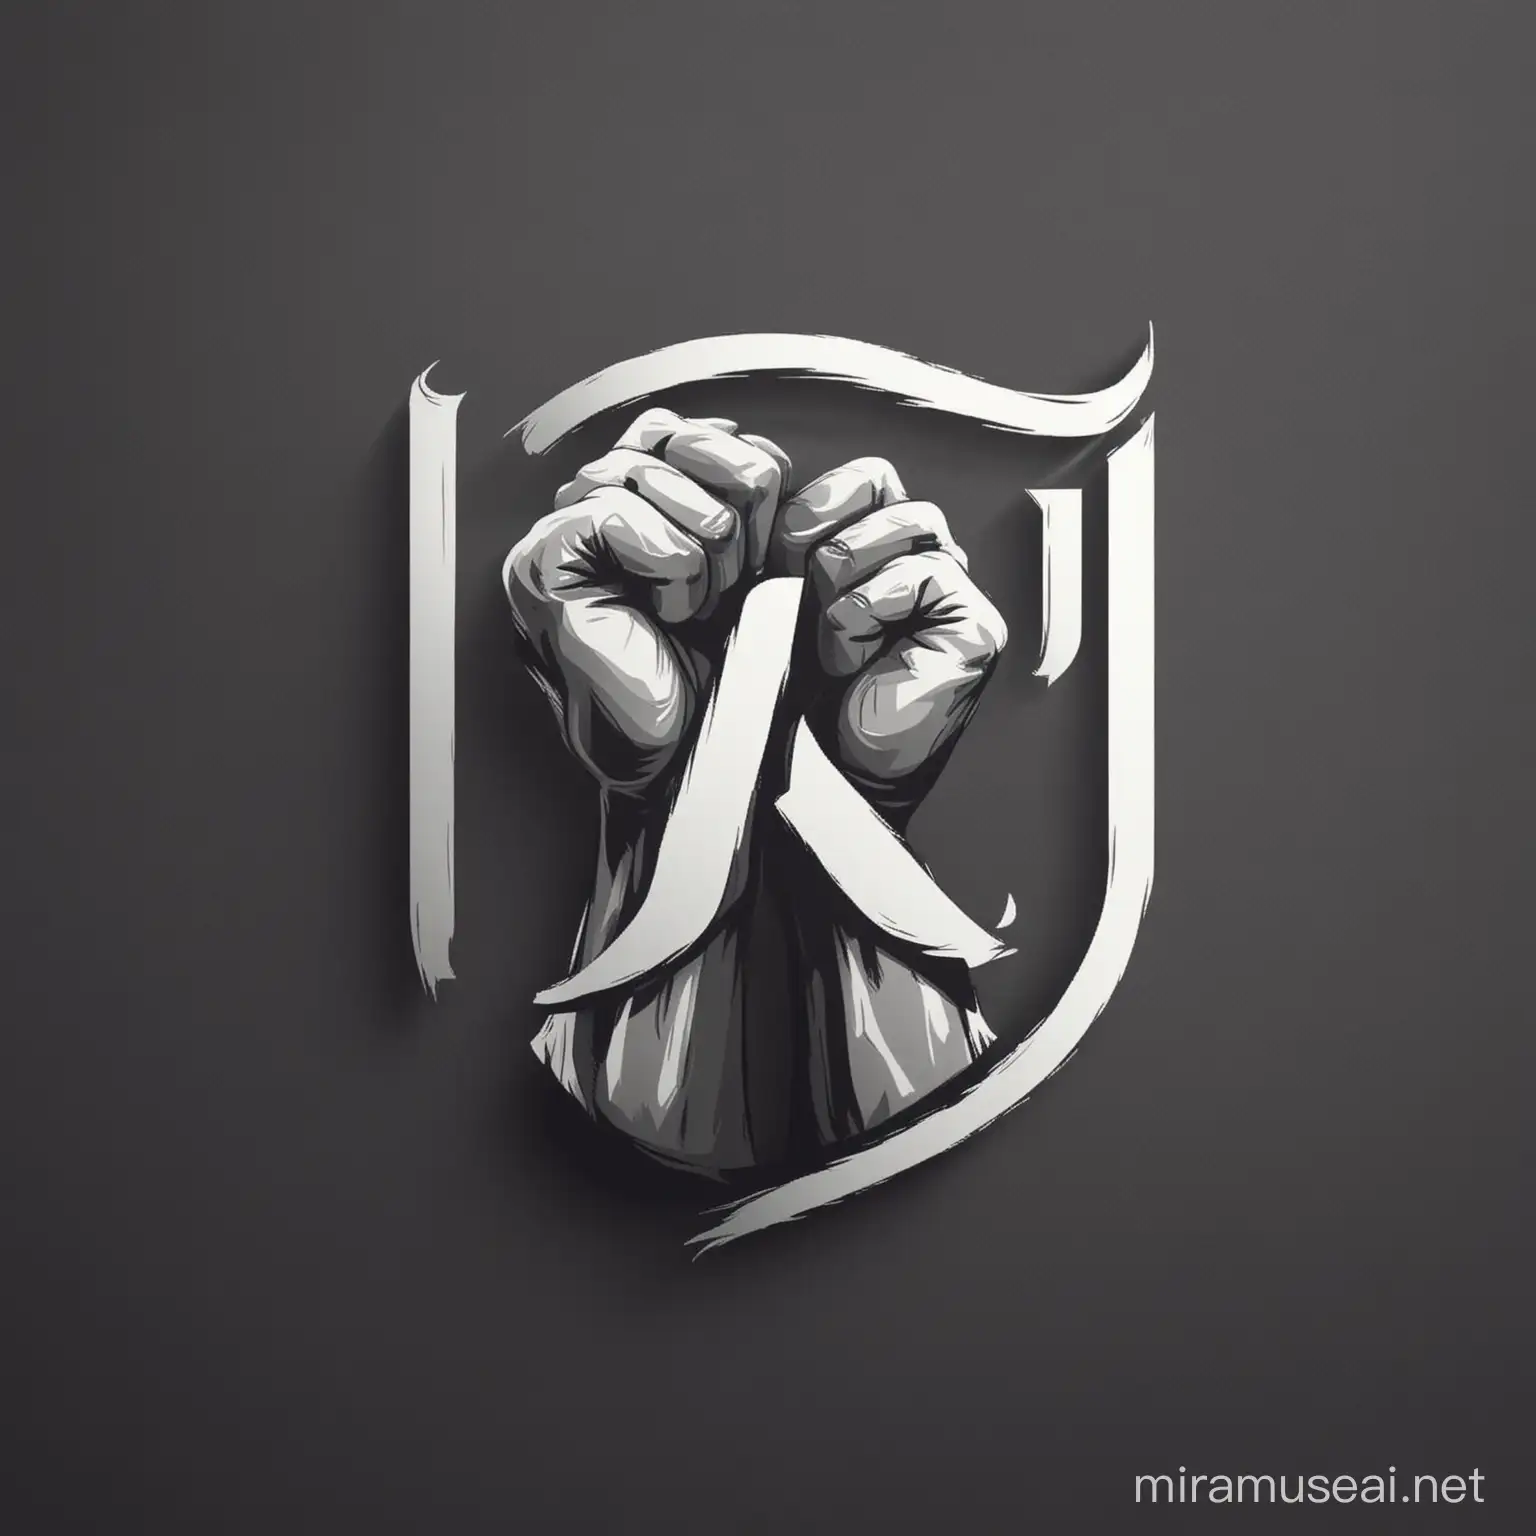 vector logo The letter U is intertwined with a fist, denoting unity